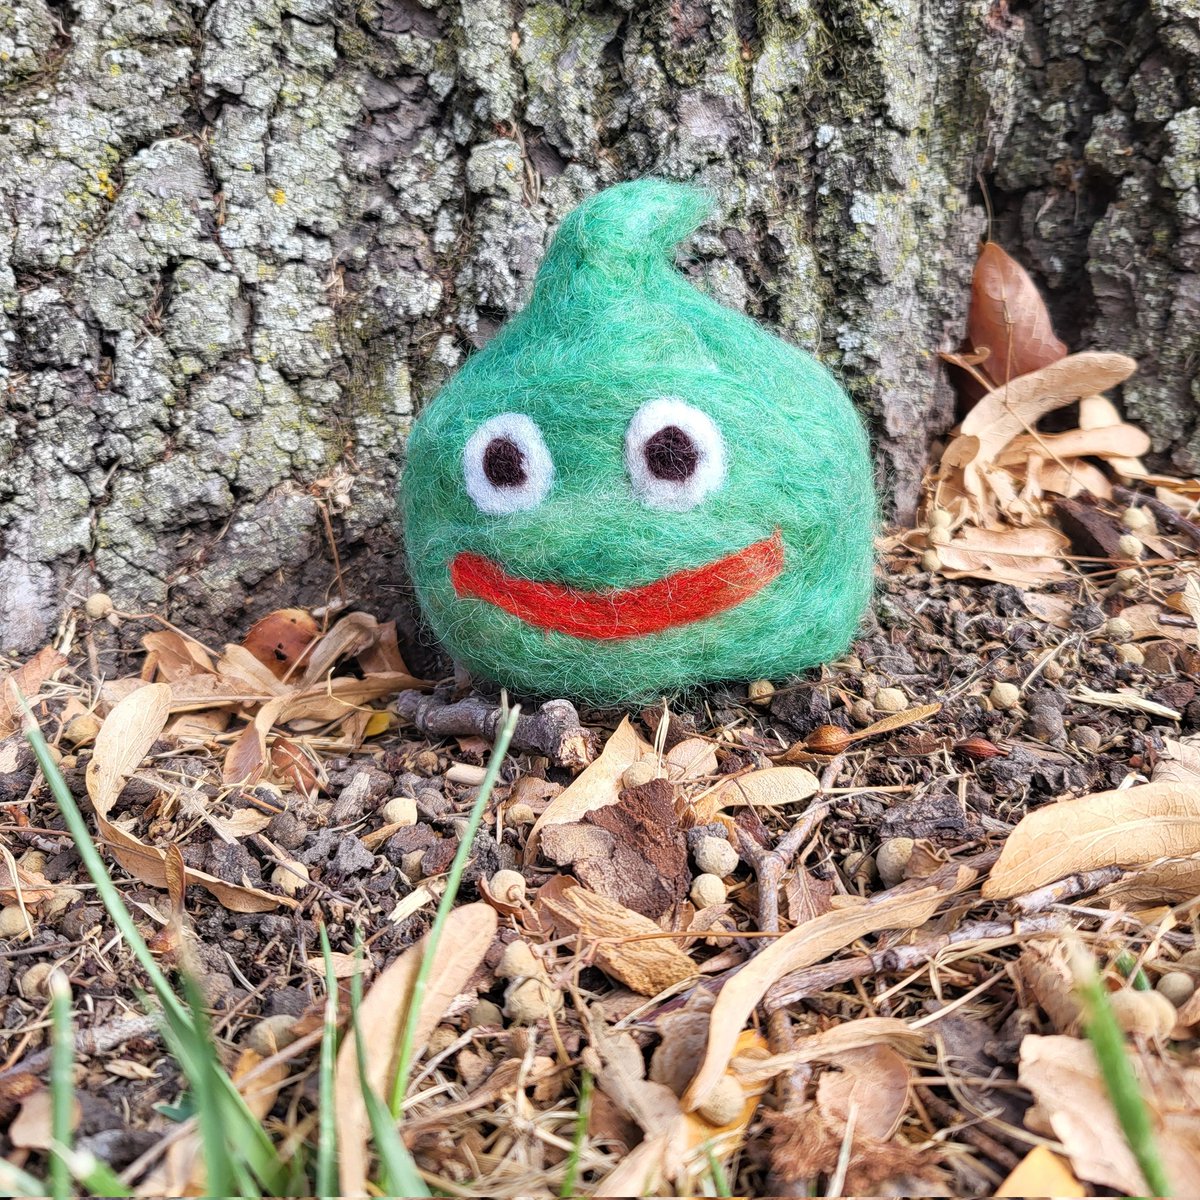 There was that one time I created a #DragonQuest Slime and everyone thought it was a poo emoji.